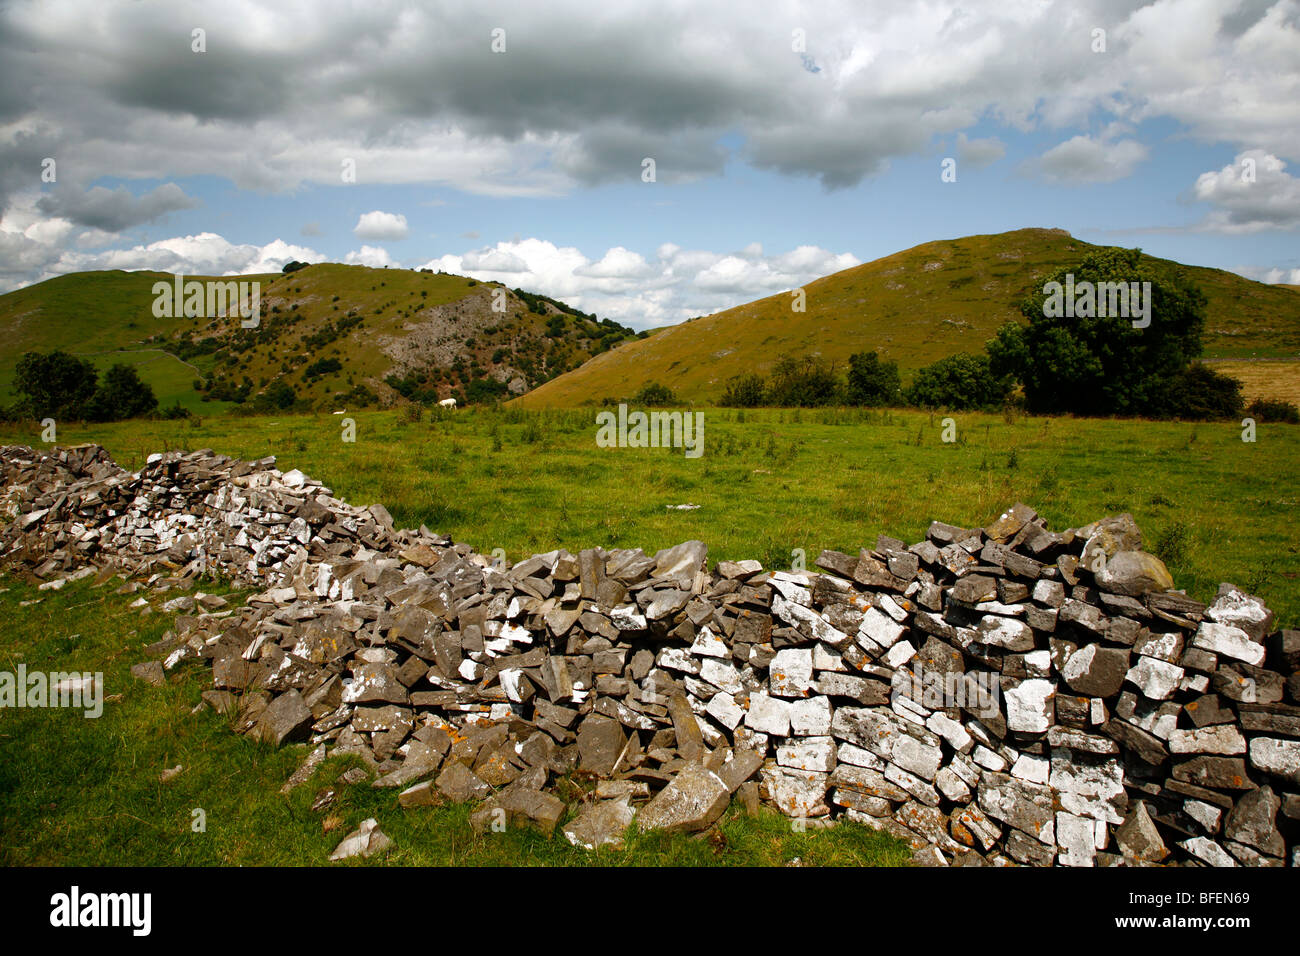 Thorpe cloud and Bunster hill, Peak district national park, Derbyshire dales, England,UK. Stock Photo